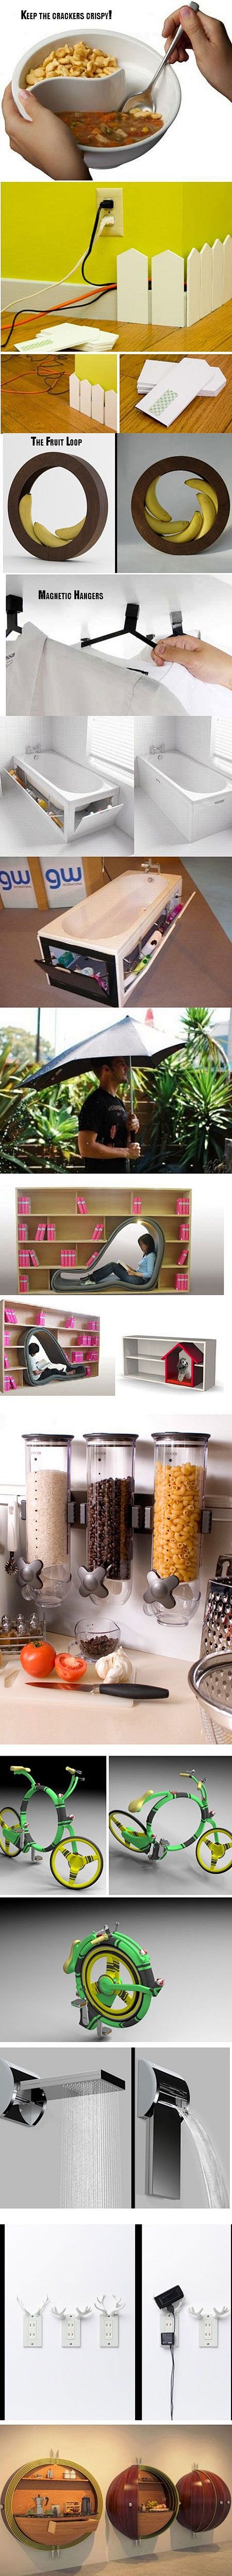 Clever inventions: 